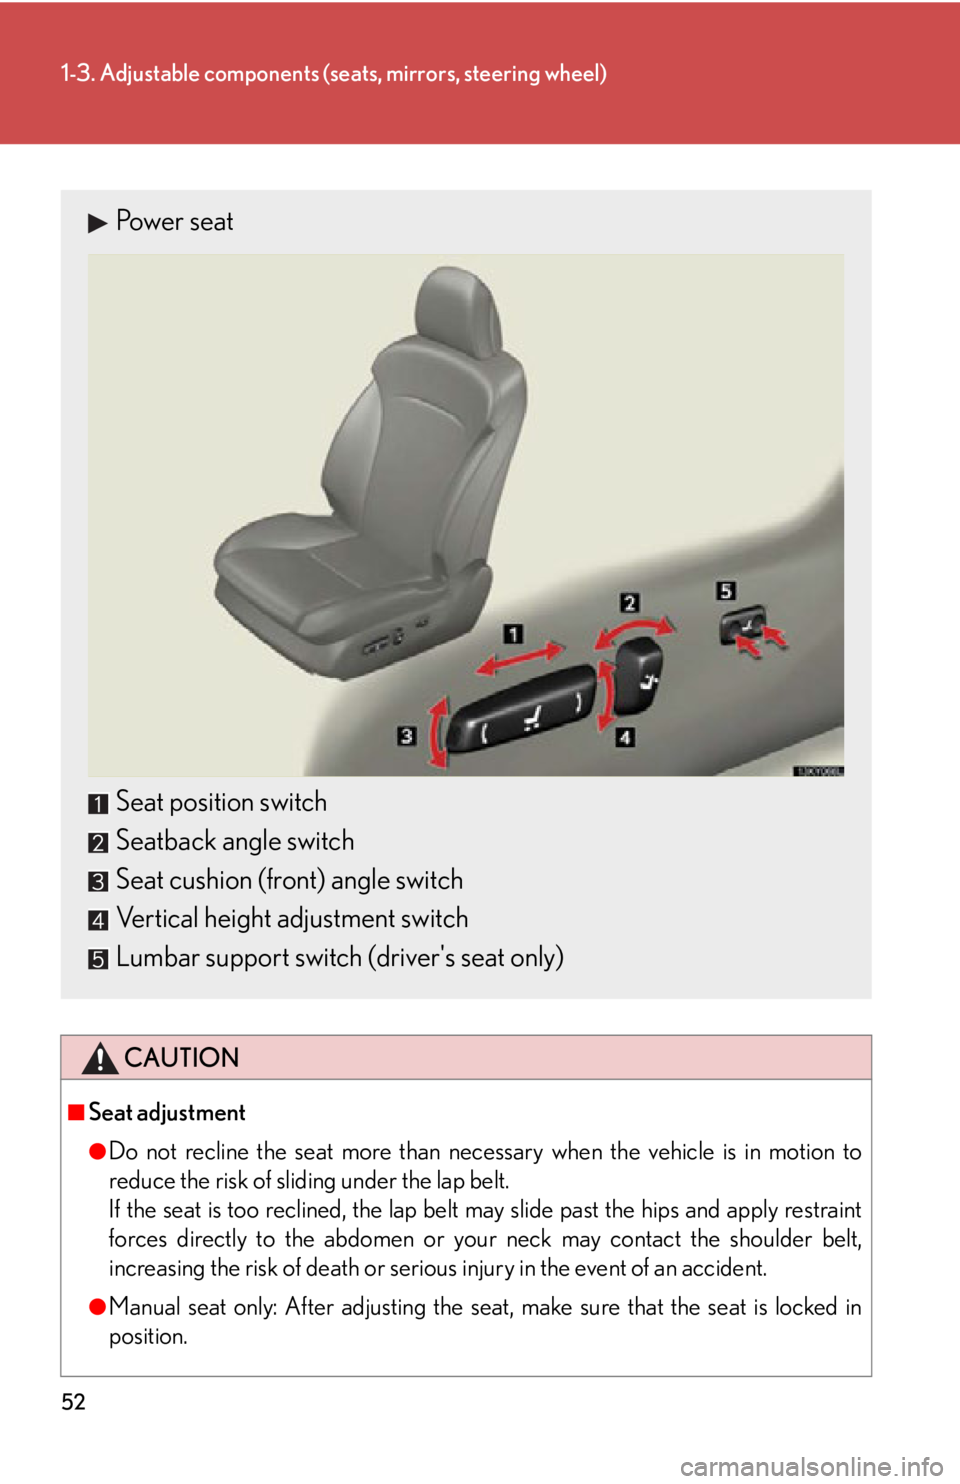 Lexus IS250 2011  Navigation Manual / LEXUS 2011 IS250/IS350 OWNERS MANUAL (OM53839U) 52
1-3. Adjustable components (seats, mirrors, steering wheel)
CAUTION
■Seat adjustment
●Do not recline the seat more than necessary when the vehicle is in motion to
reduce the risk of sliding und